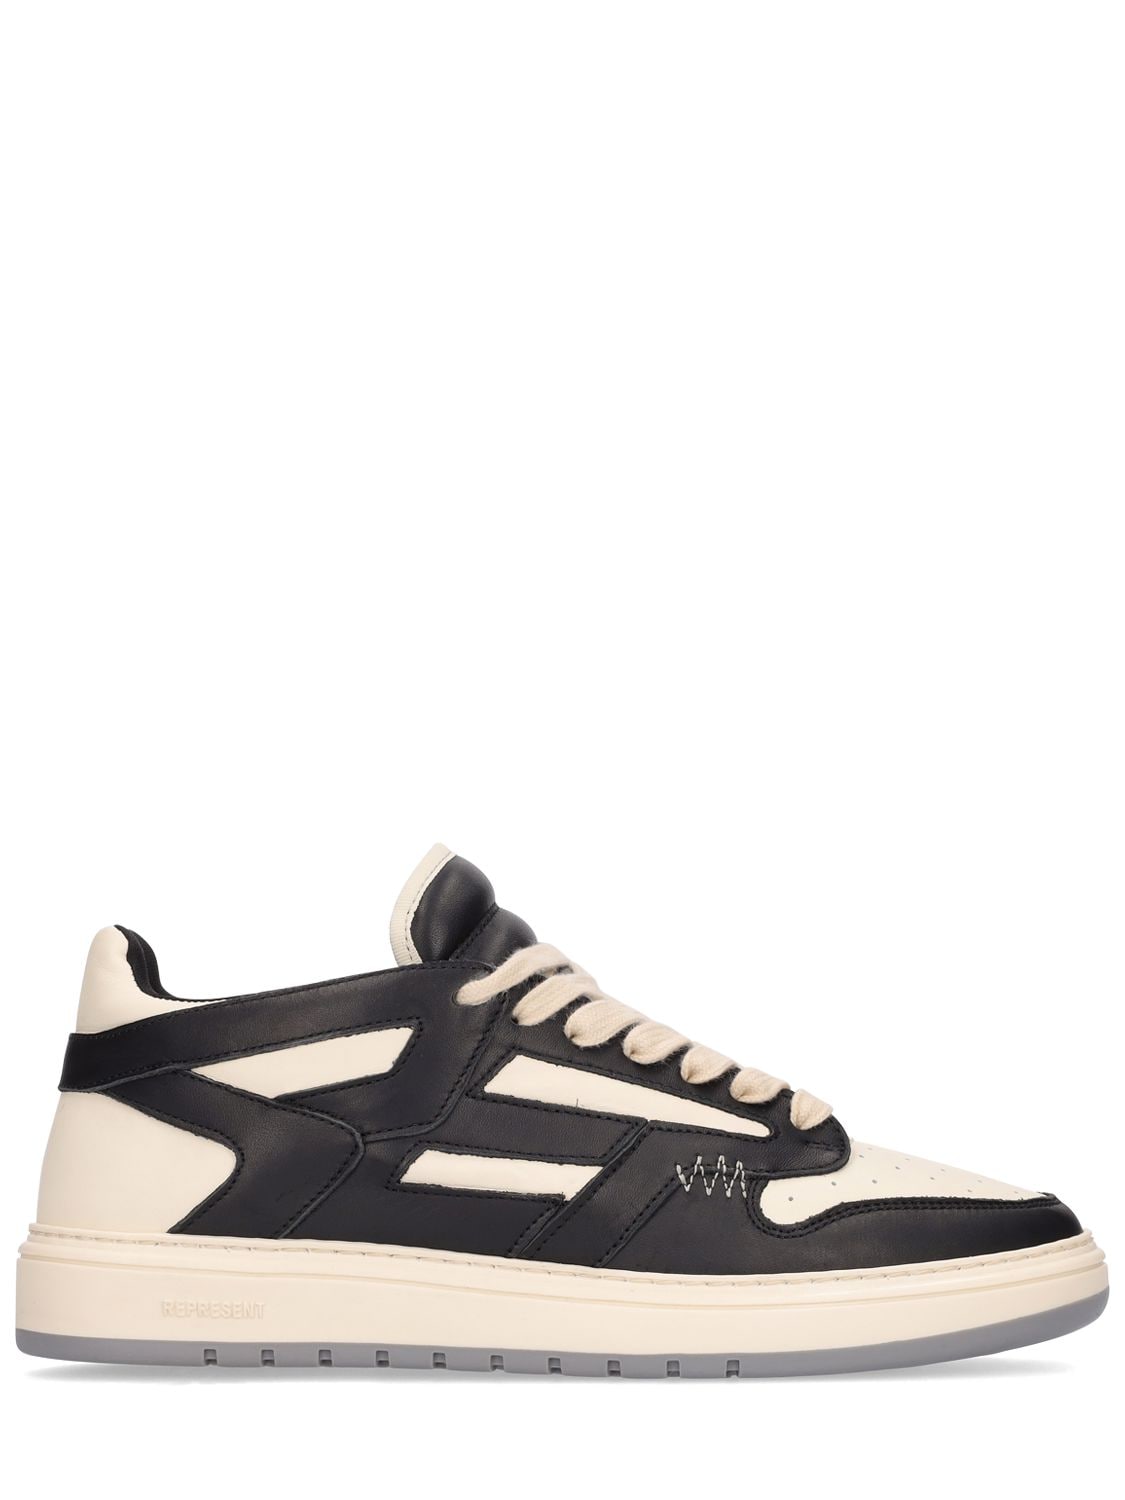 Represent Reptor Low Leather Sneakers In Black,white